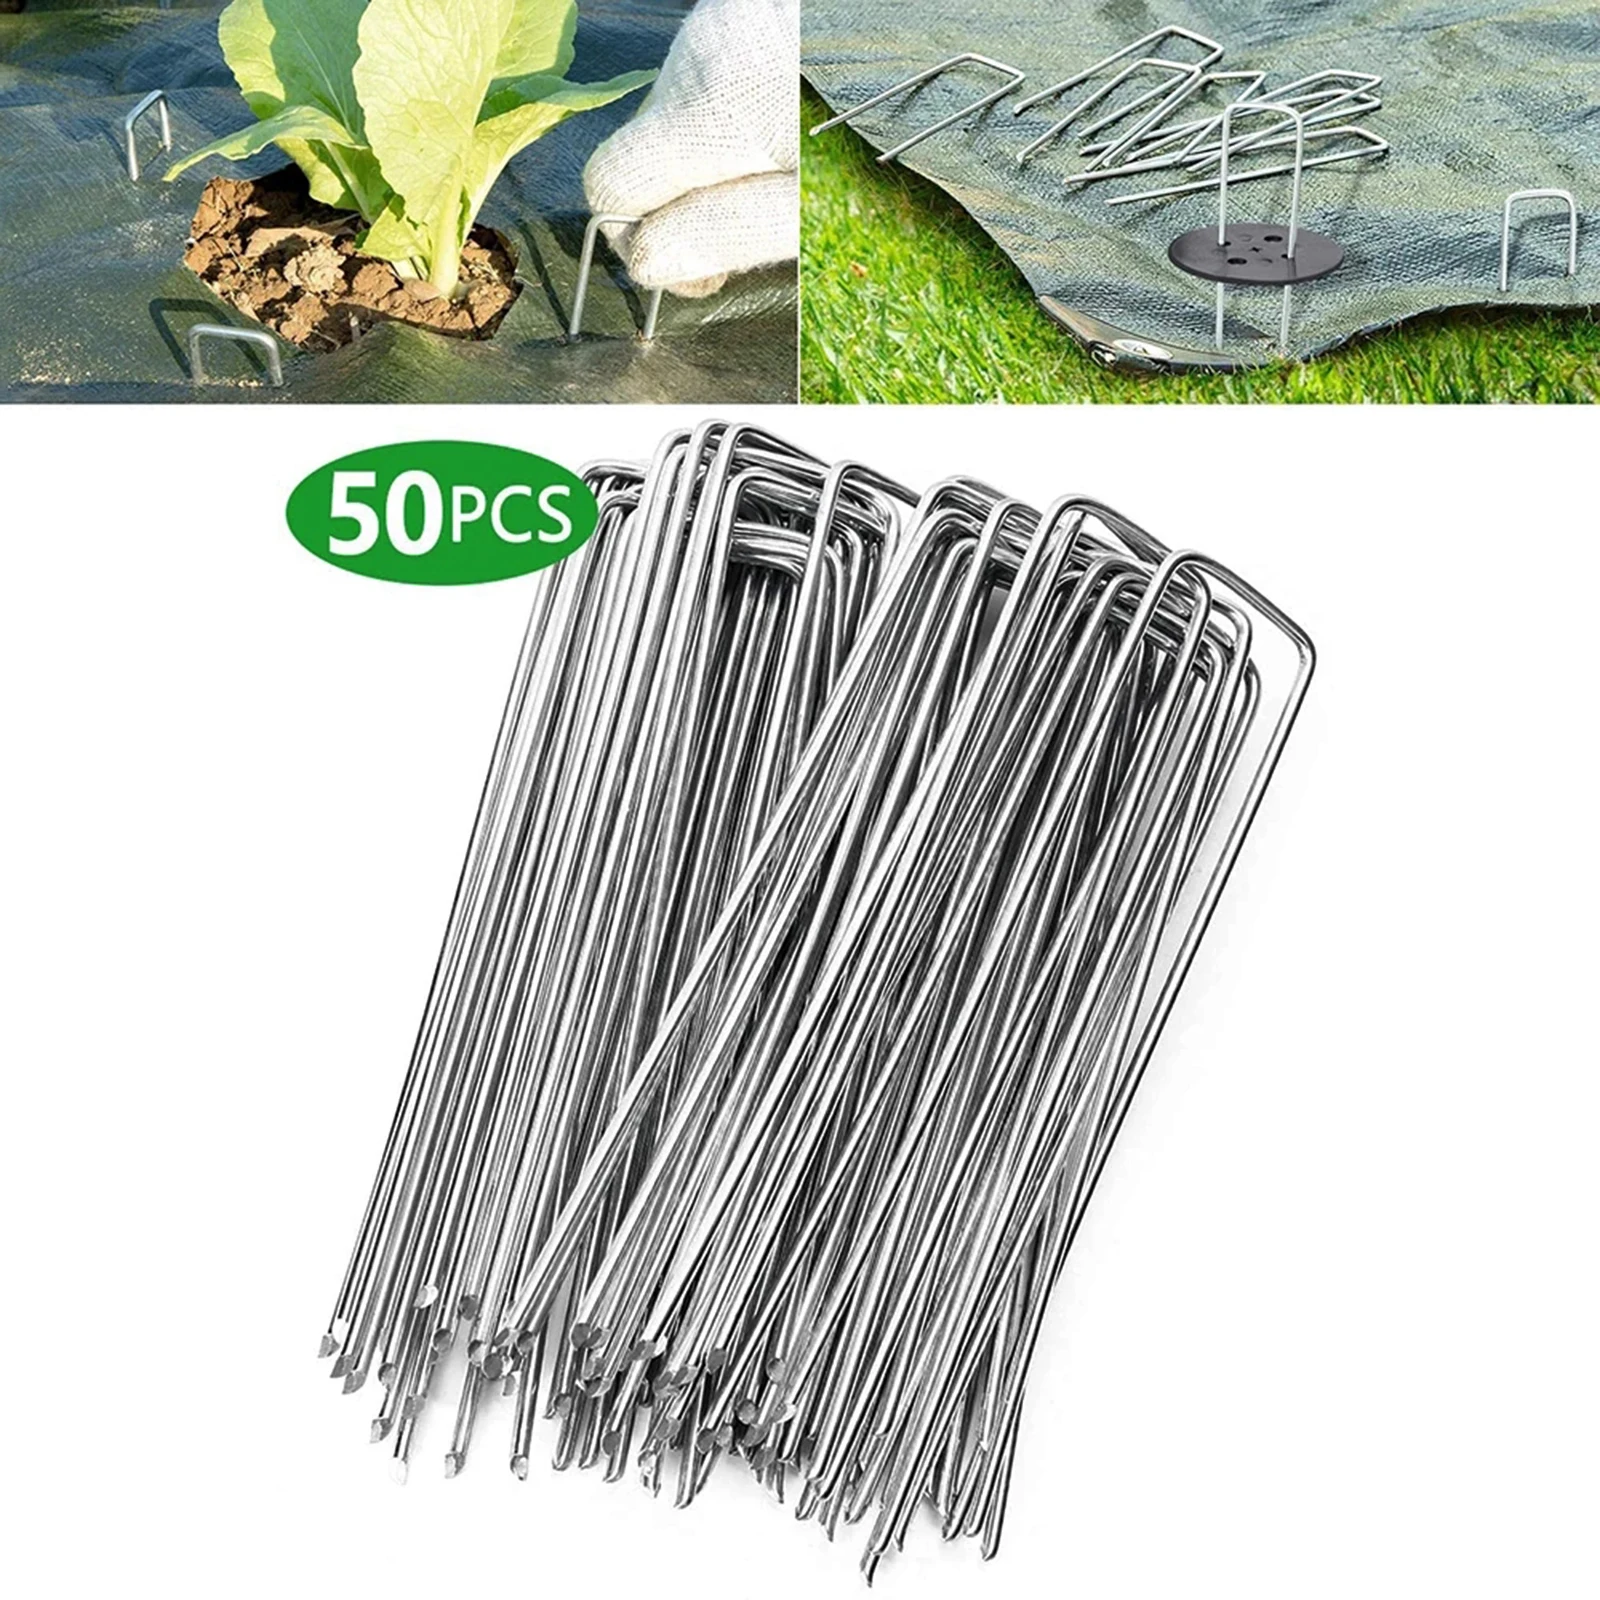 50pcs U-Shaped Fixing Nail Galvanized Steel Garden Pile Turf Nails For Fixing Weed Fabric Landscape Mesh Net